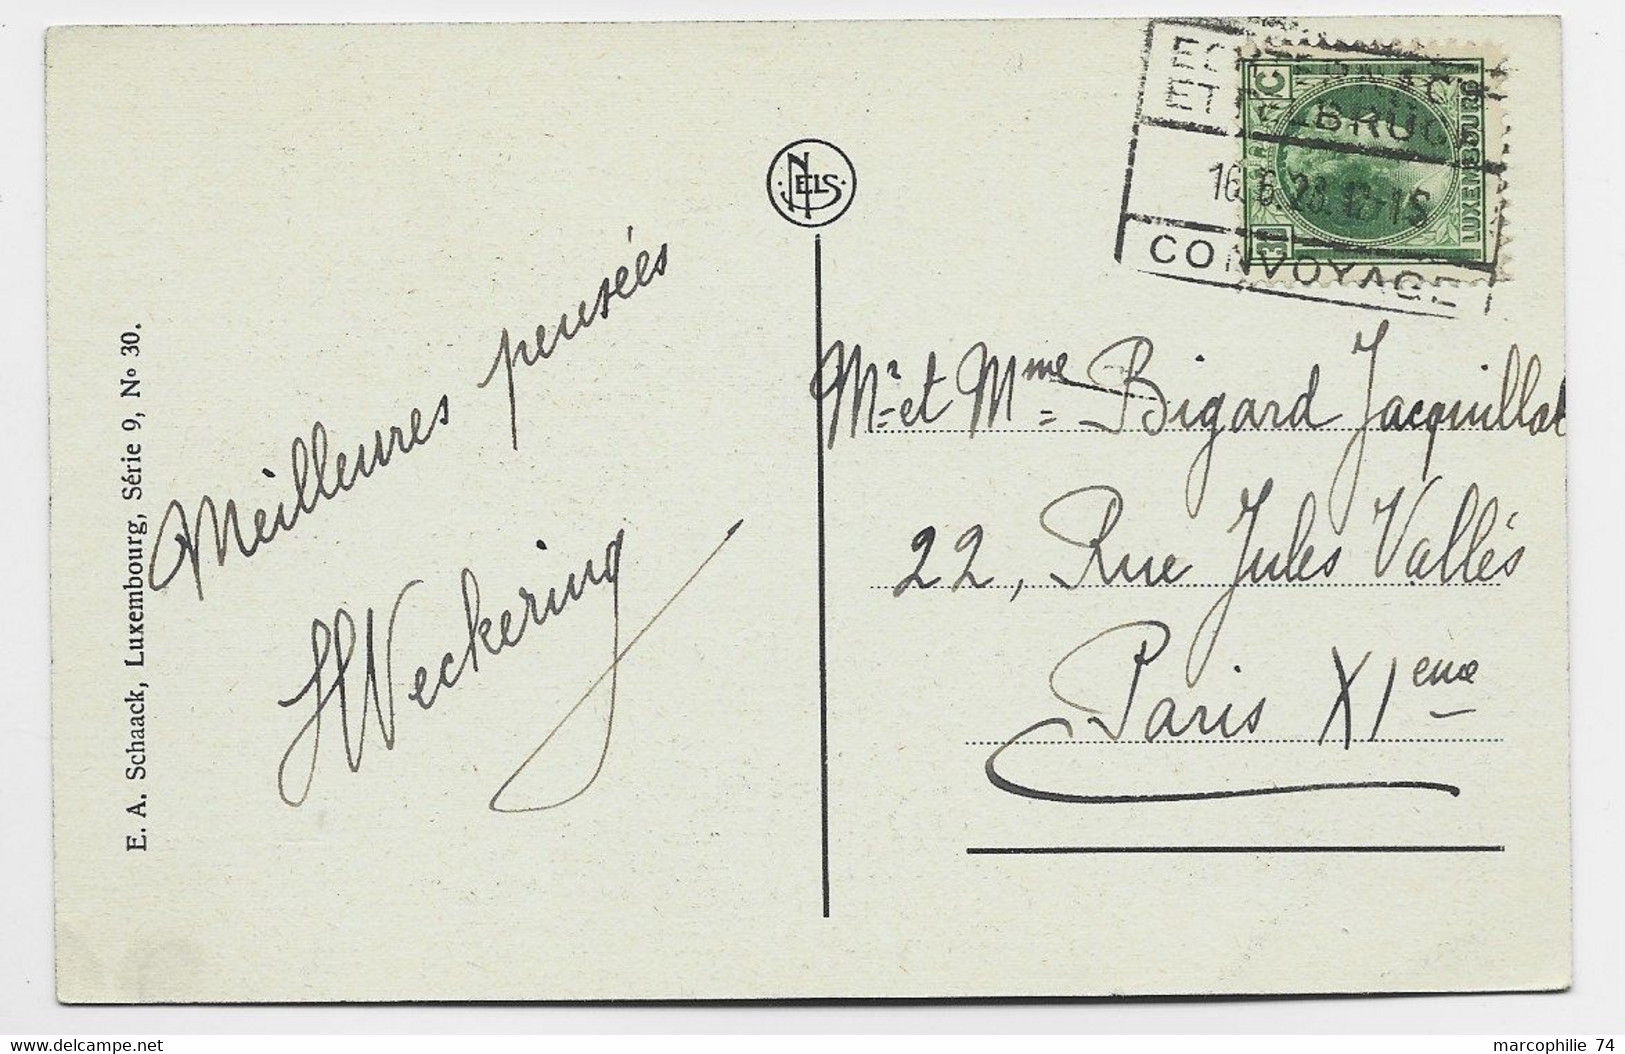 LUXEMBOURG 30C VERT SEUL SOLO CARD GRIFFE CONVOYAGE ECHTERNACH 16.6.1928 TO FRANCE - 1914-24 Marie-Adelaide